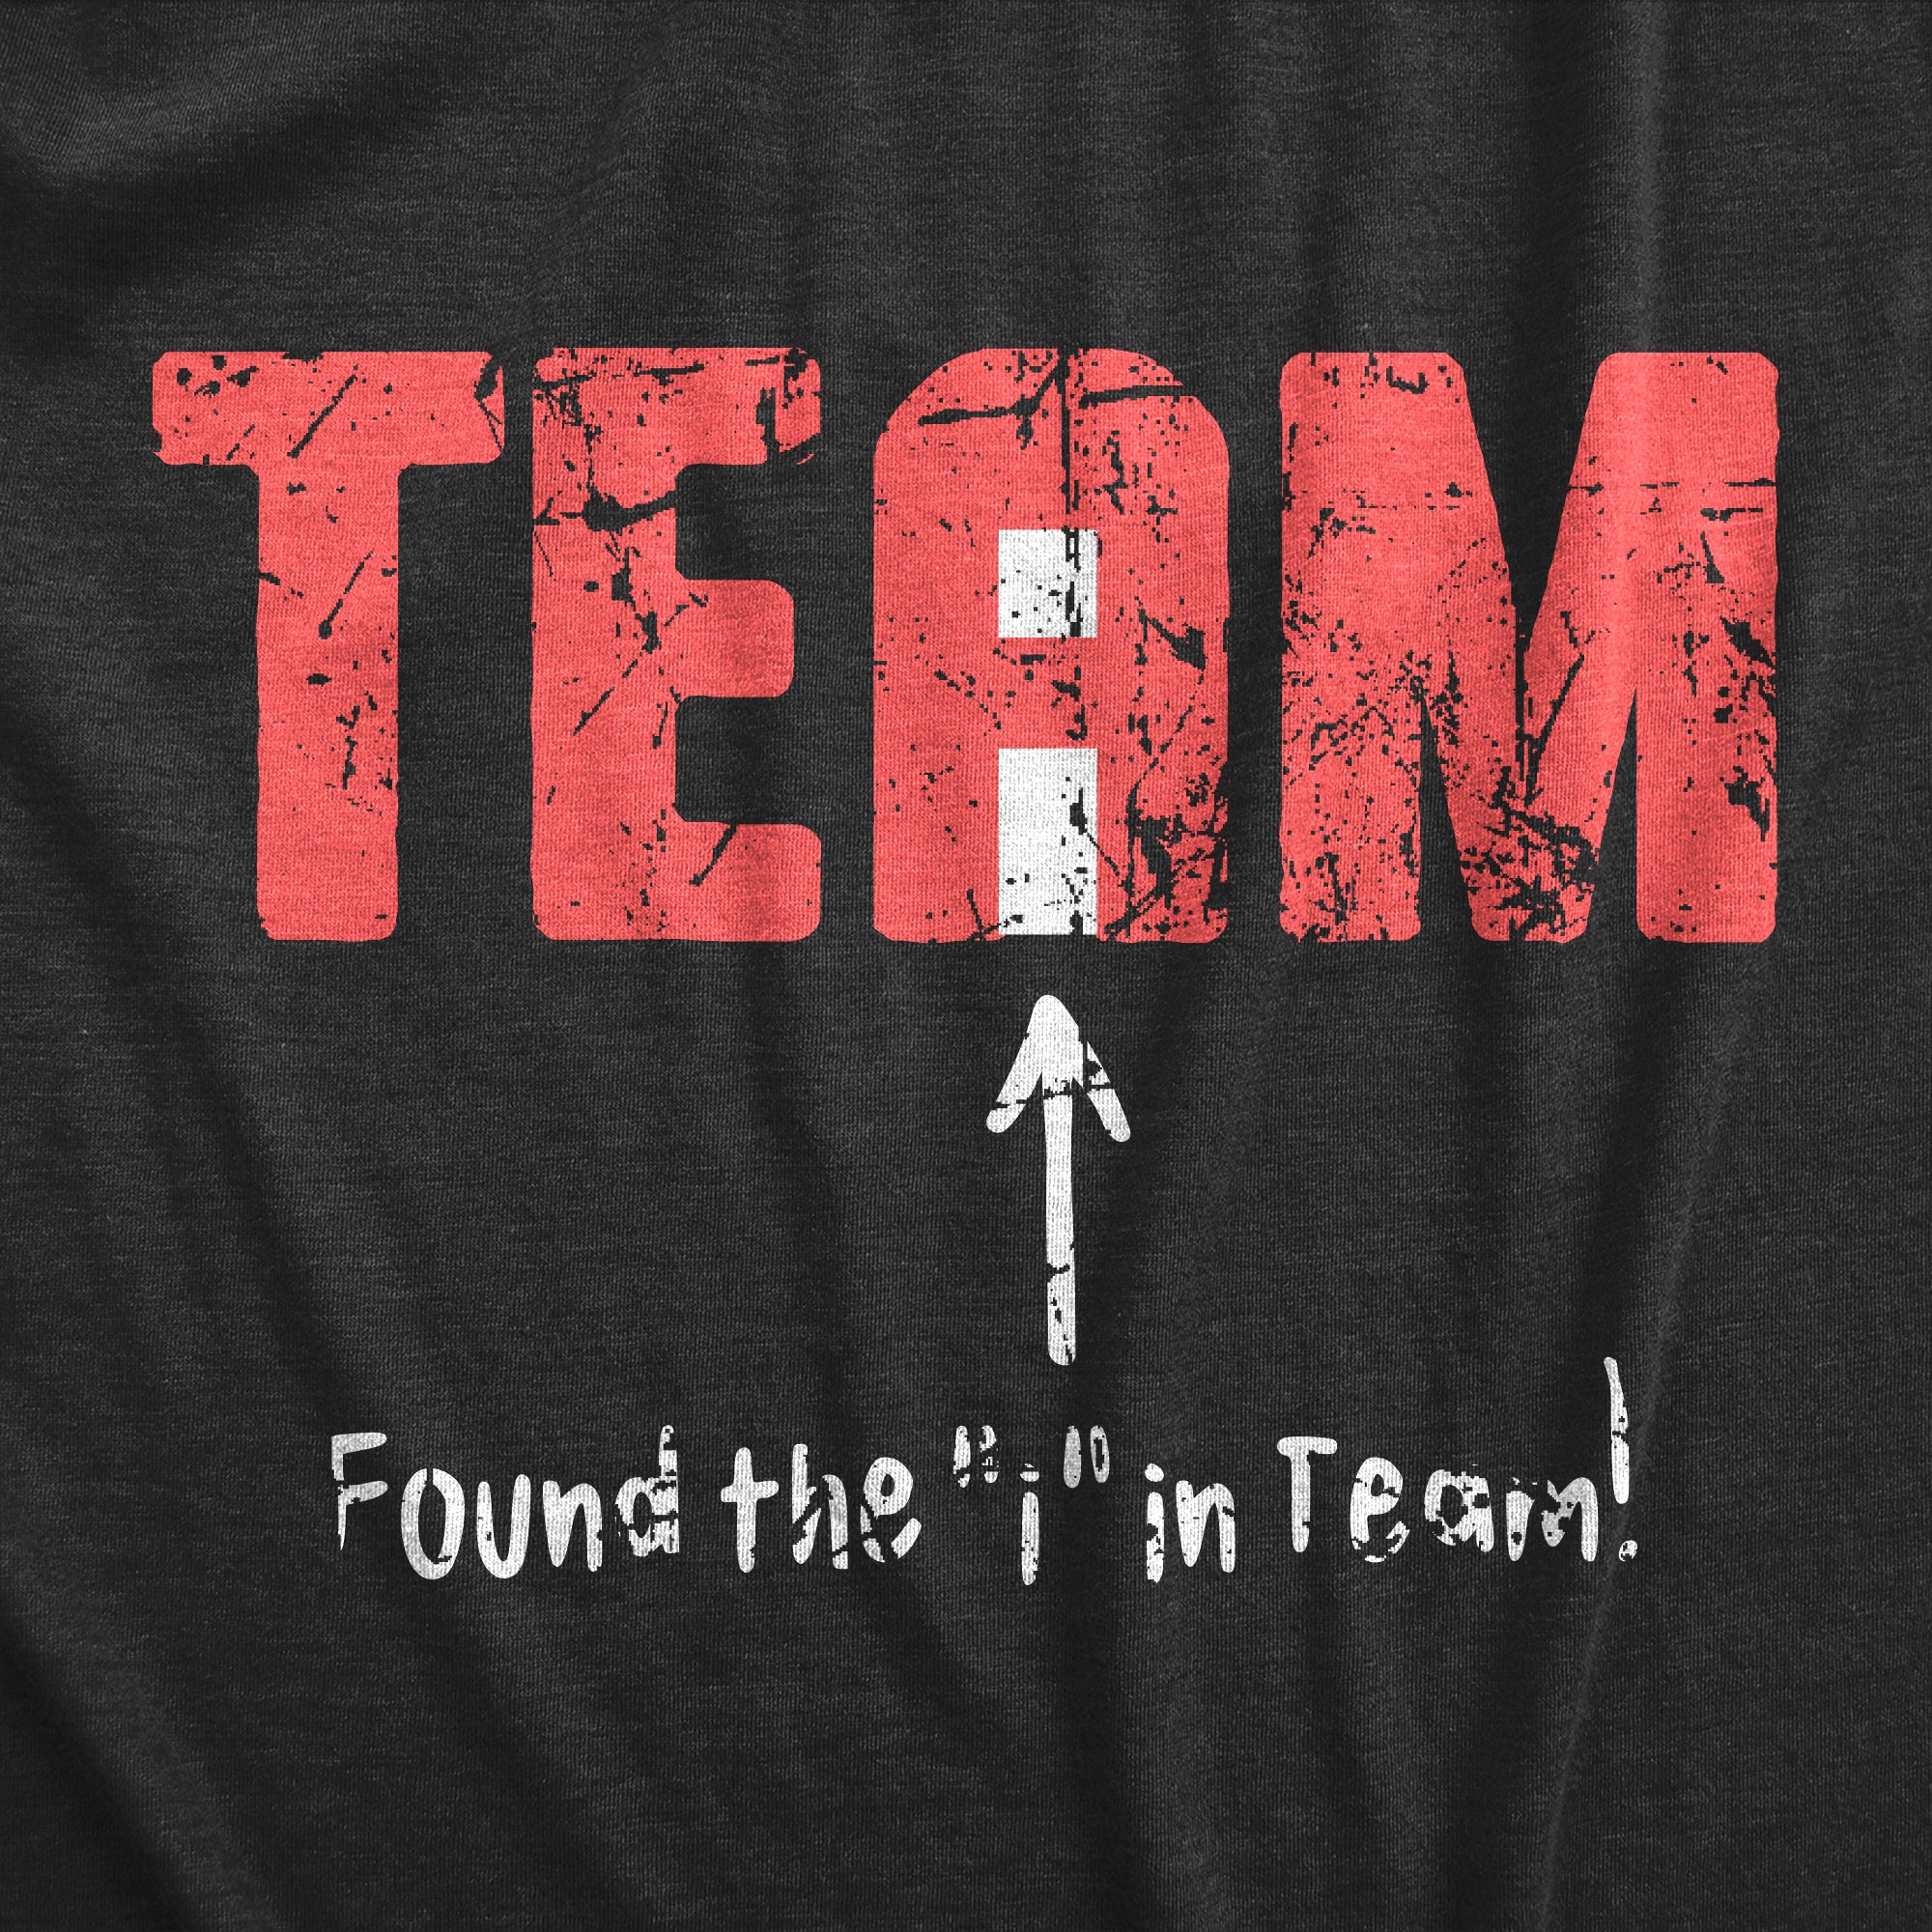 Funny Heather Black - TEAM Found The I In Team Mens T Shirt Nerdy Sarcastic Tee